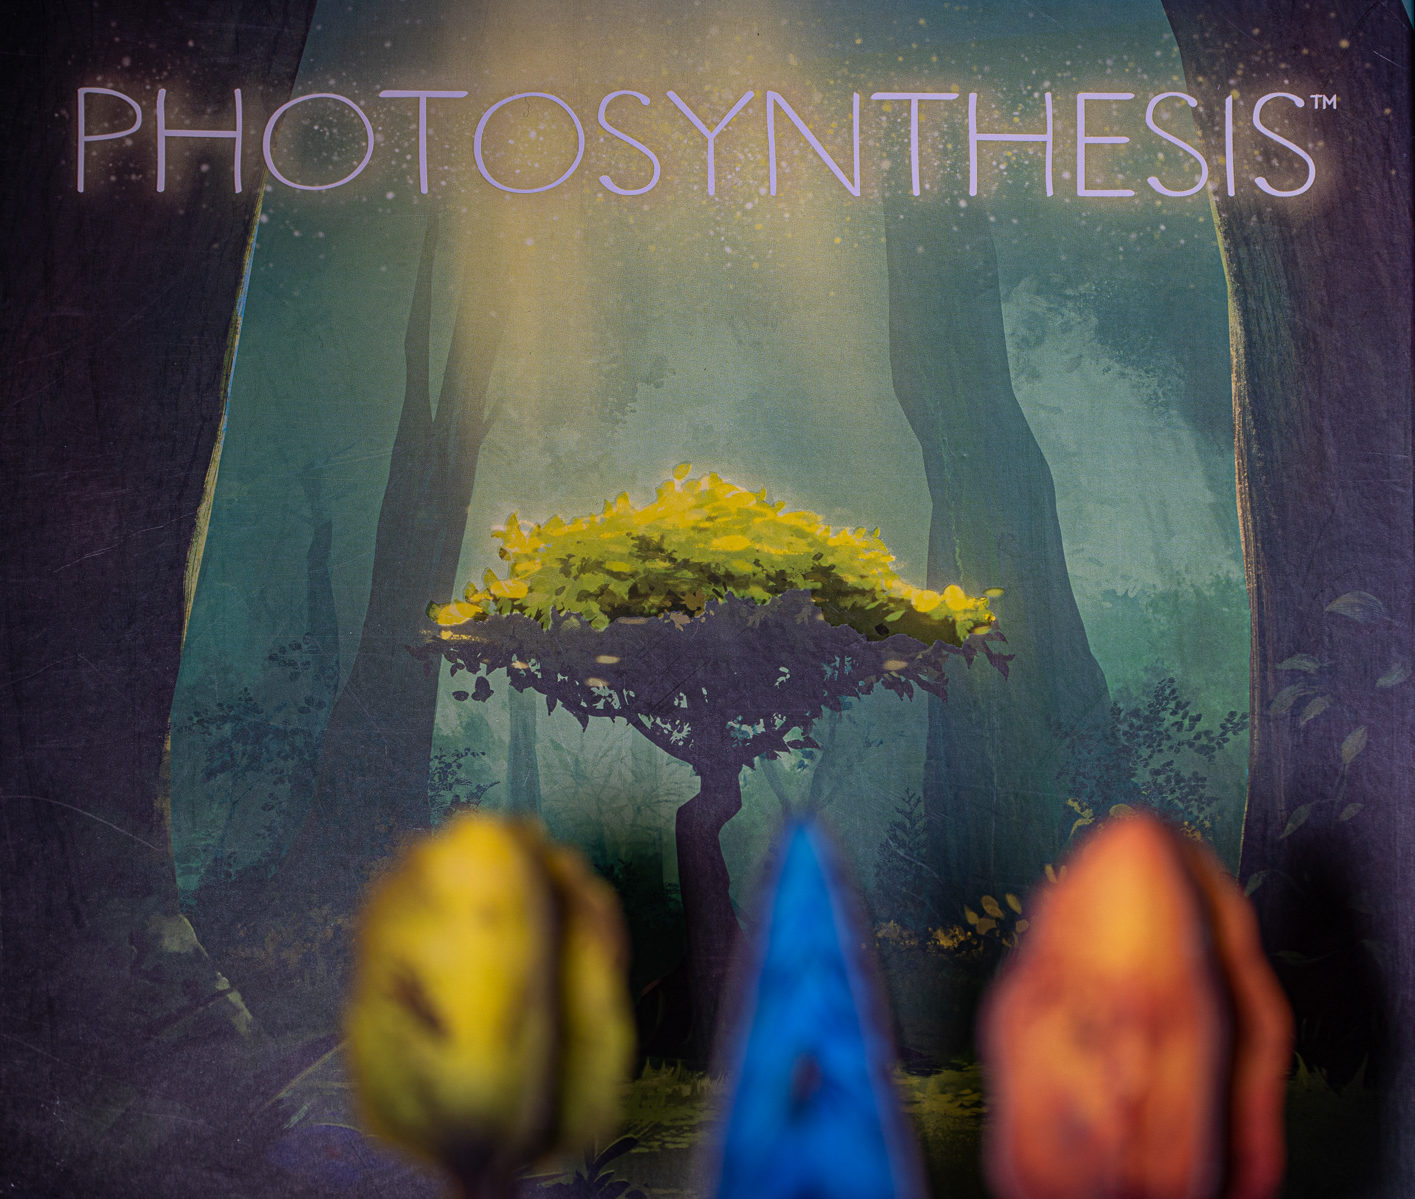 Is Photosynthesis Fun?